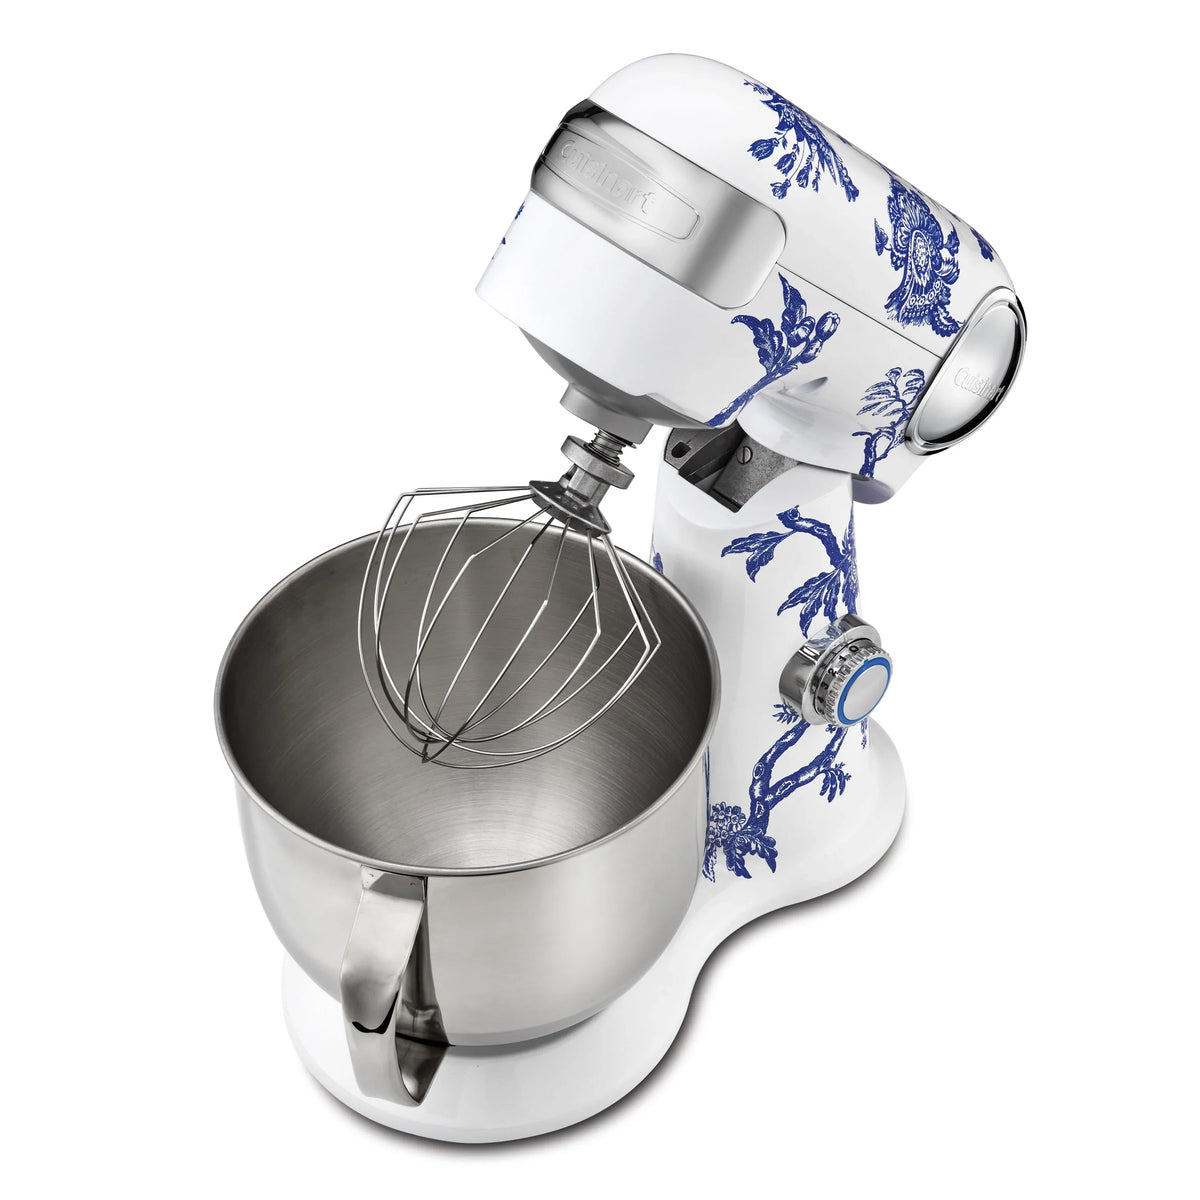 A Caskata X Cuisinart Limited Edition Arcadia Performance Stand Mixer with a blue and white design that can be placed on a kitchen counter.